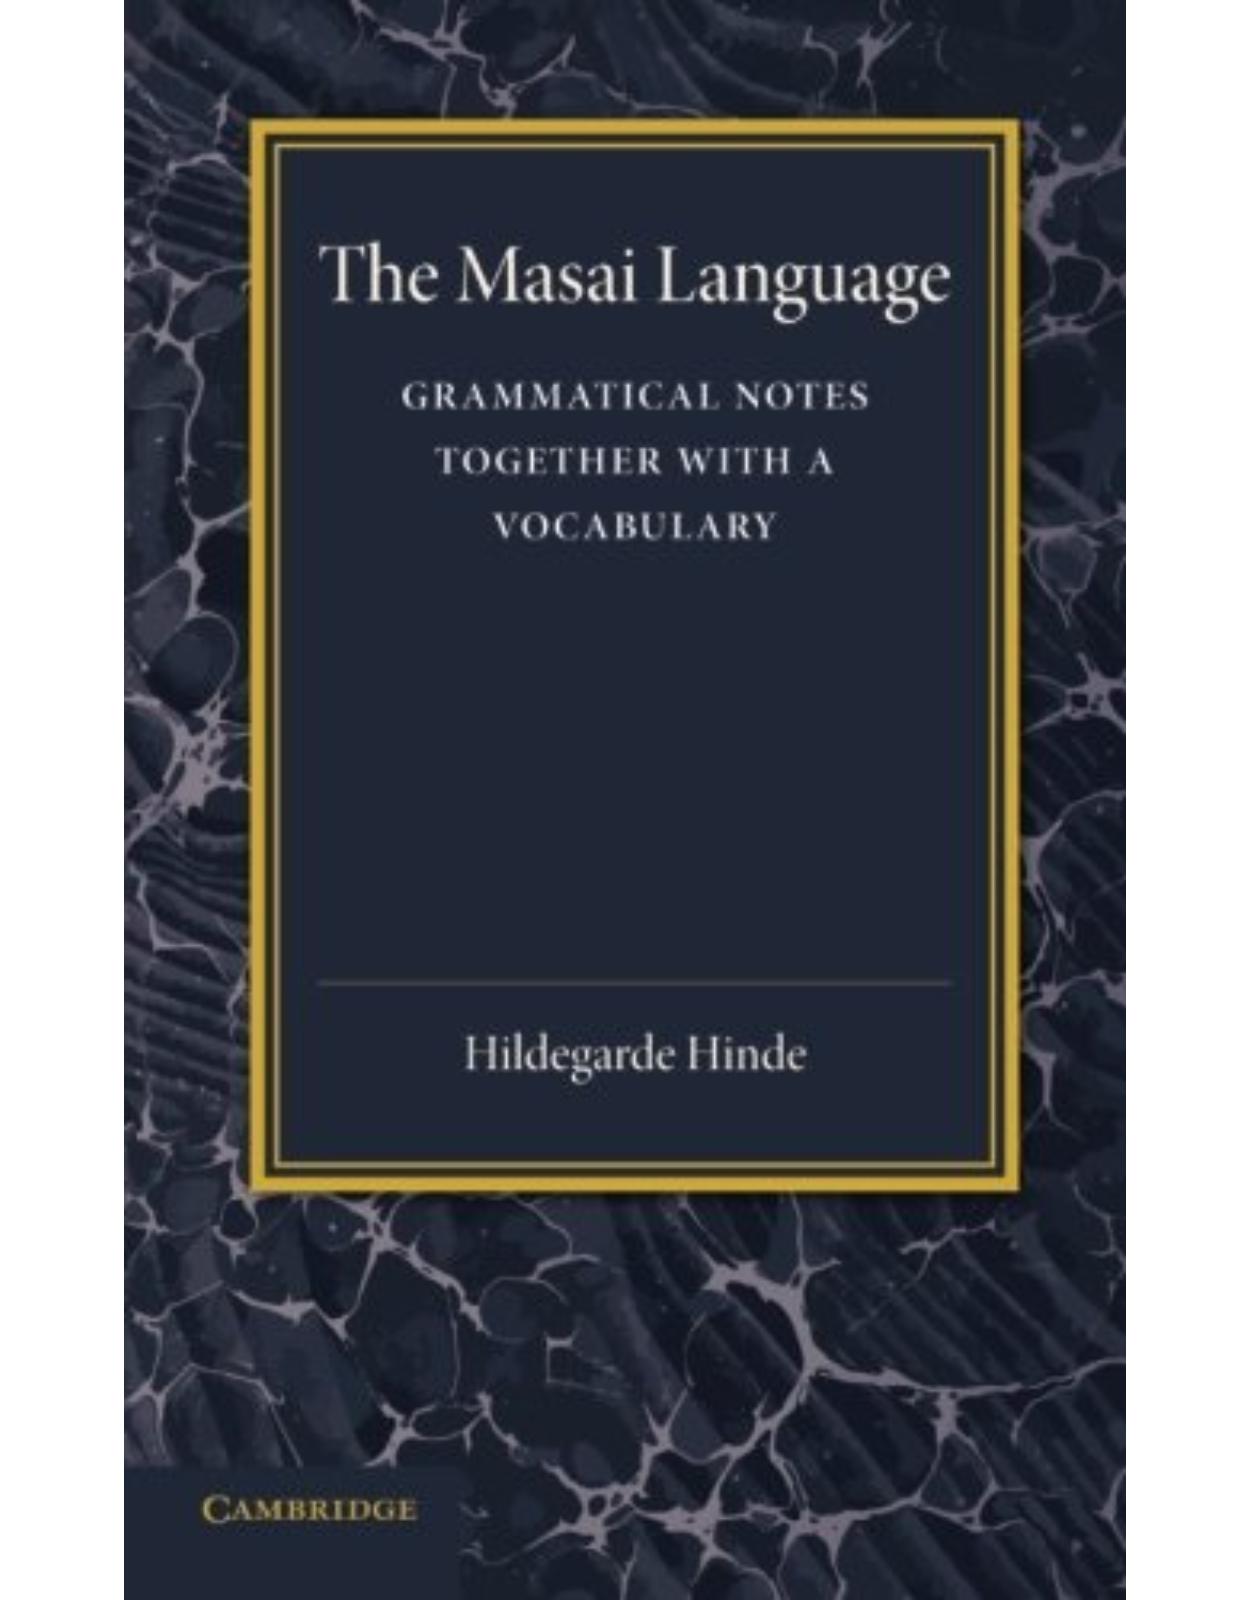 The Masai Language: Grammatical Notes Together with a Vocabulary 